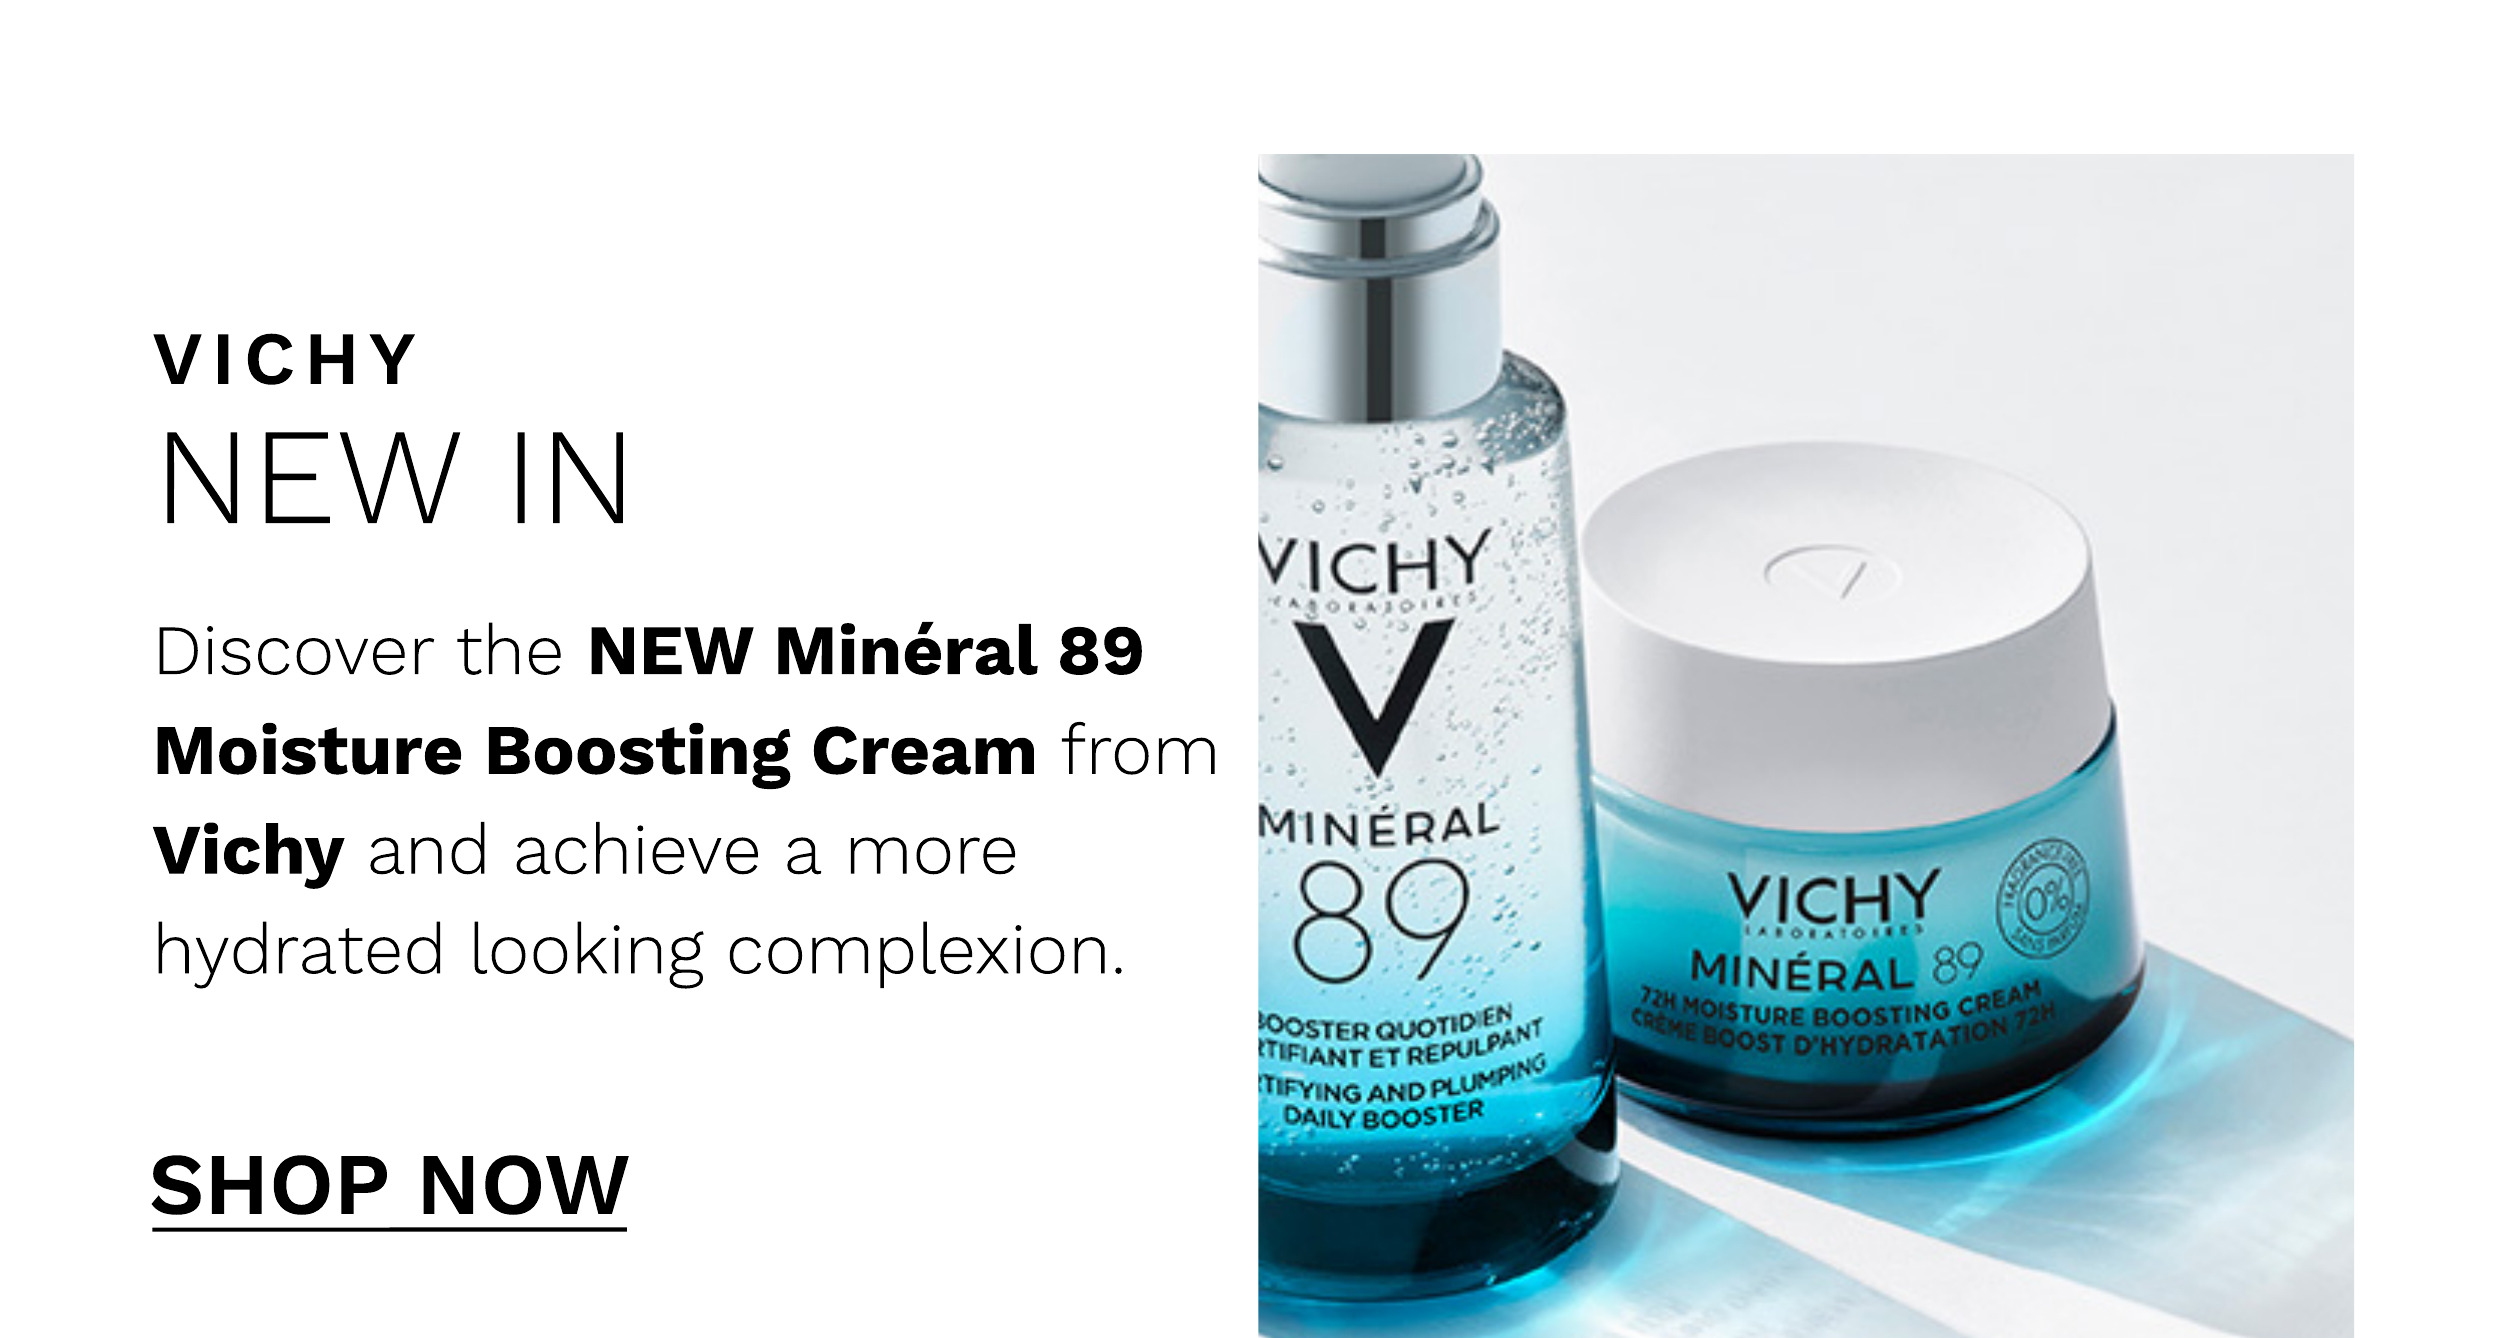 VICHY NEW IN Discover the NEW Minral 89 Moisture Boosting Cream from Vichy and achieve a more hydrated looking complexion. SHOP NOW 